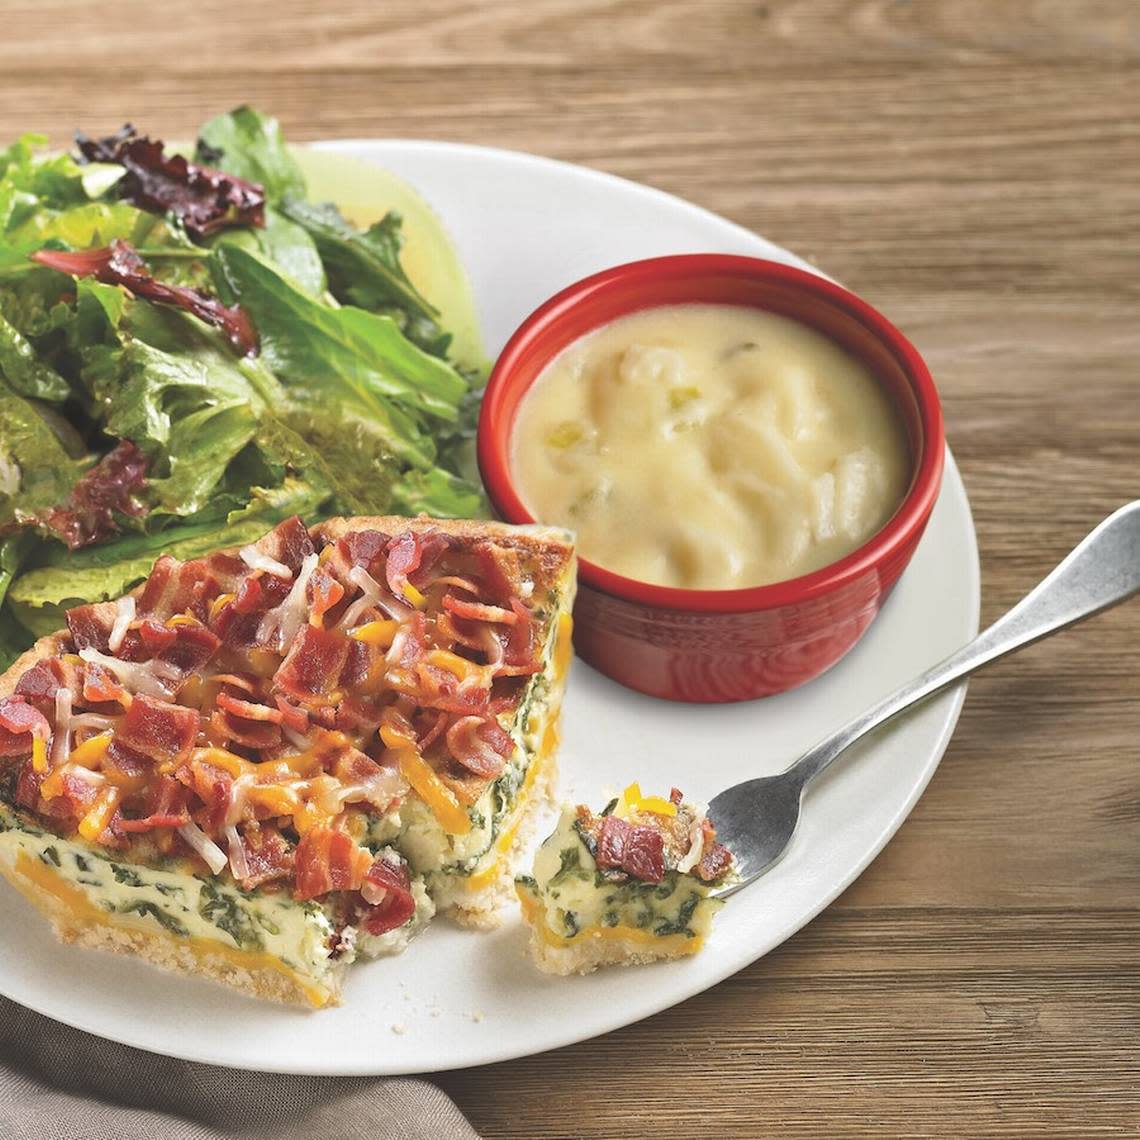 The restaurant offers a pick-three combo for $13.50: a slice of bacon quiche, side salad and a cup of potato cheese soup.